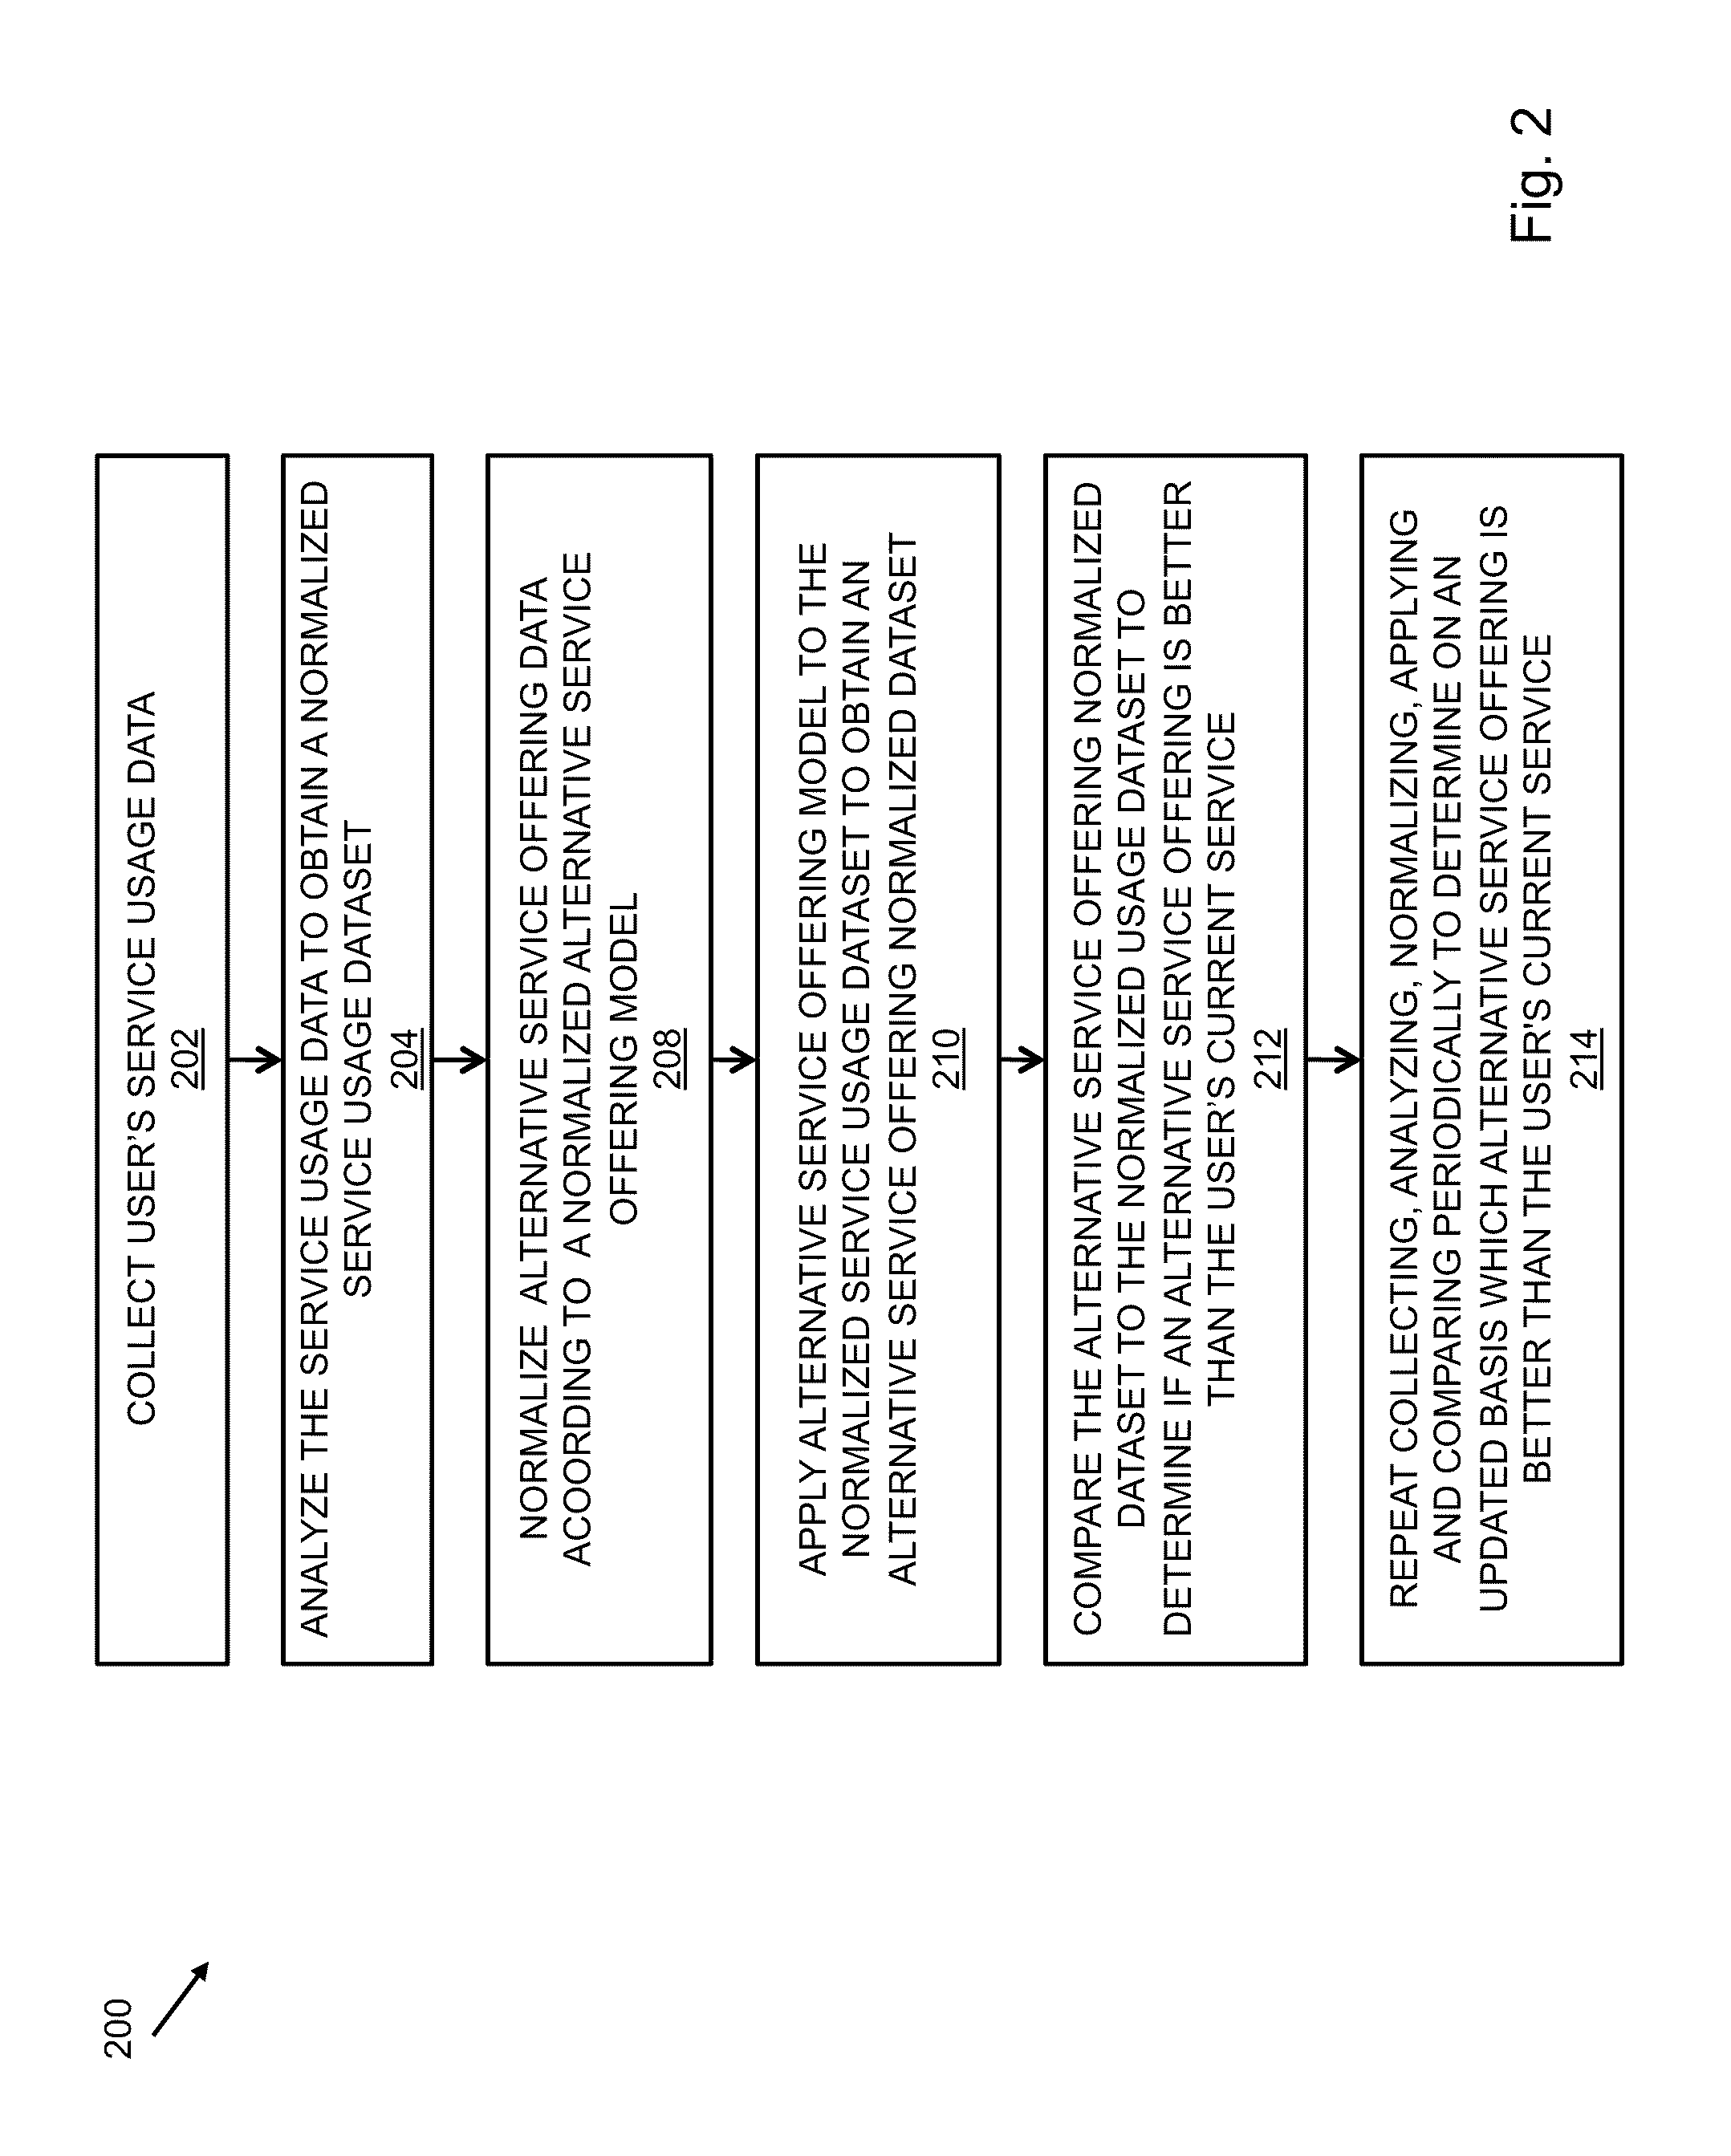 System and method for providing a geo-enhanced savings opportunity in association with a financial account